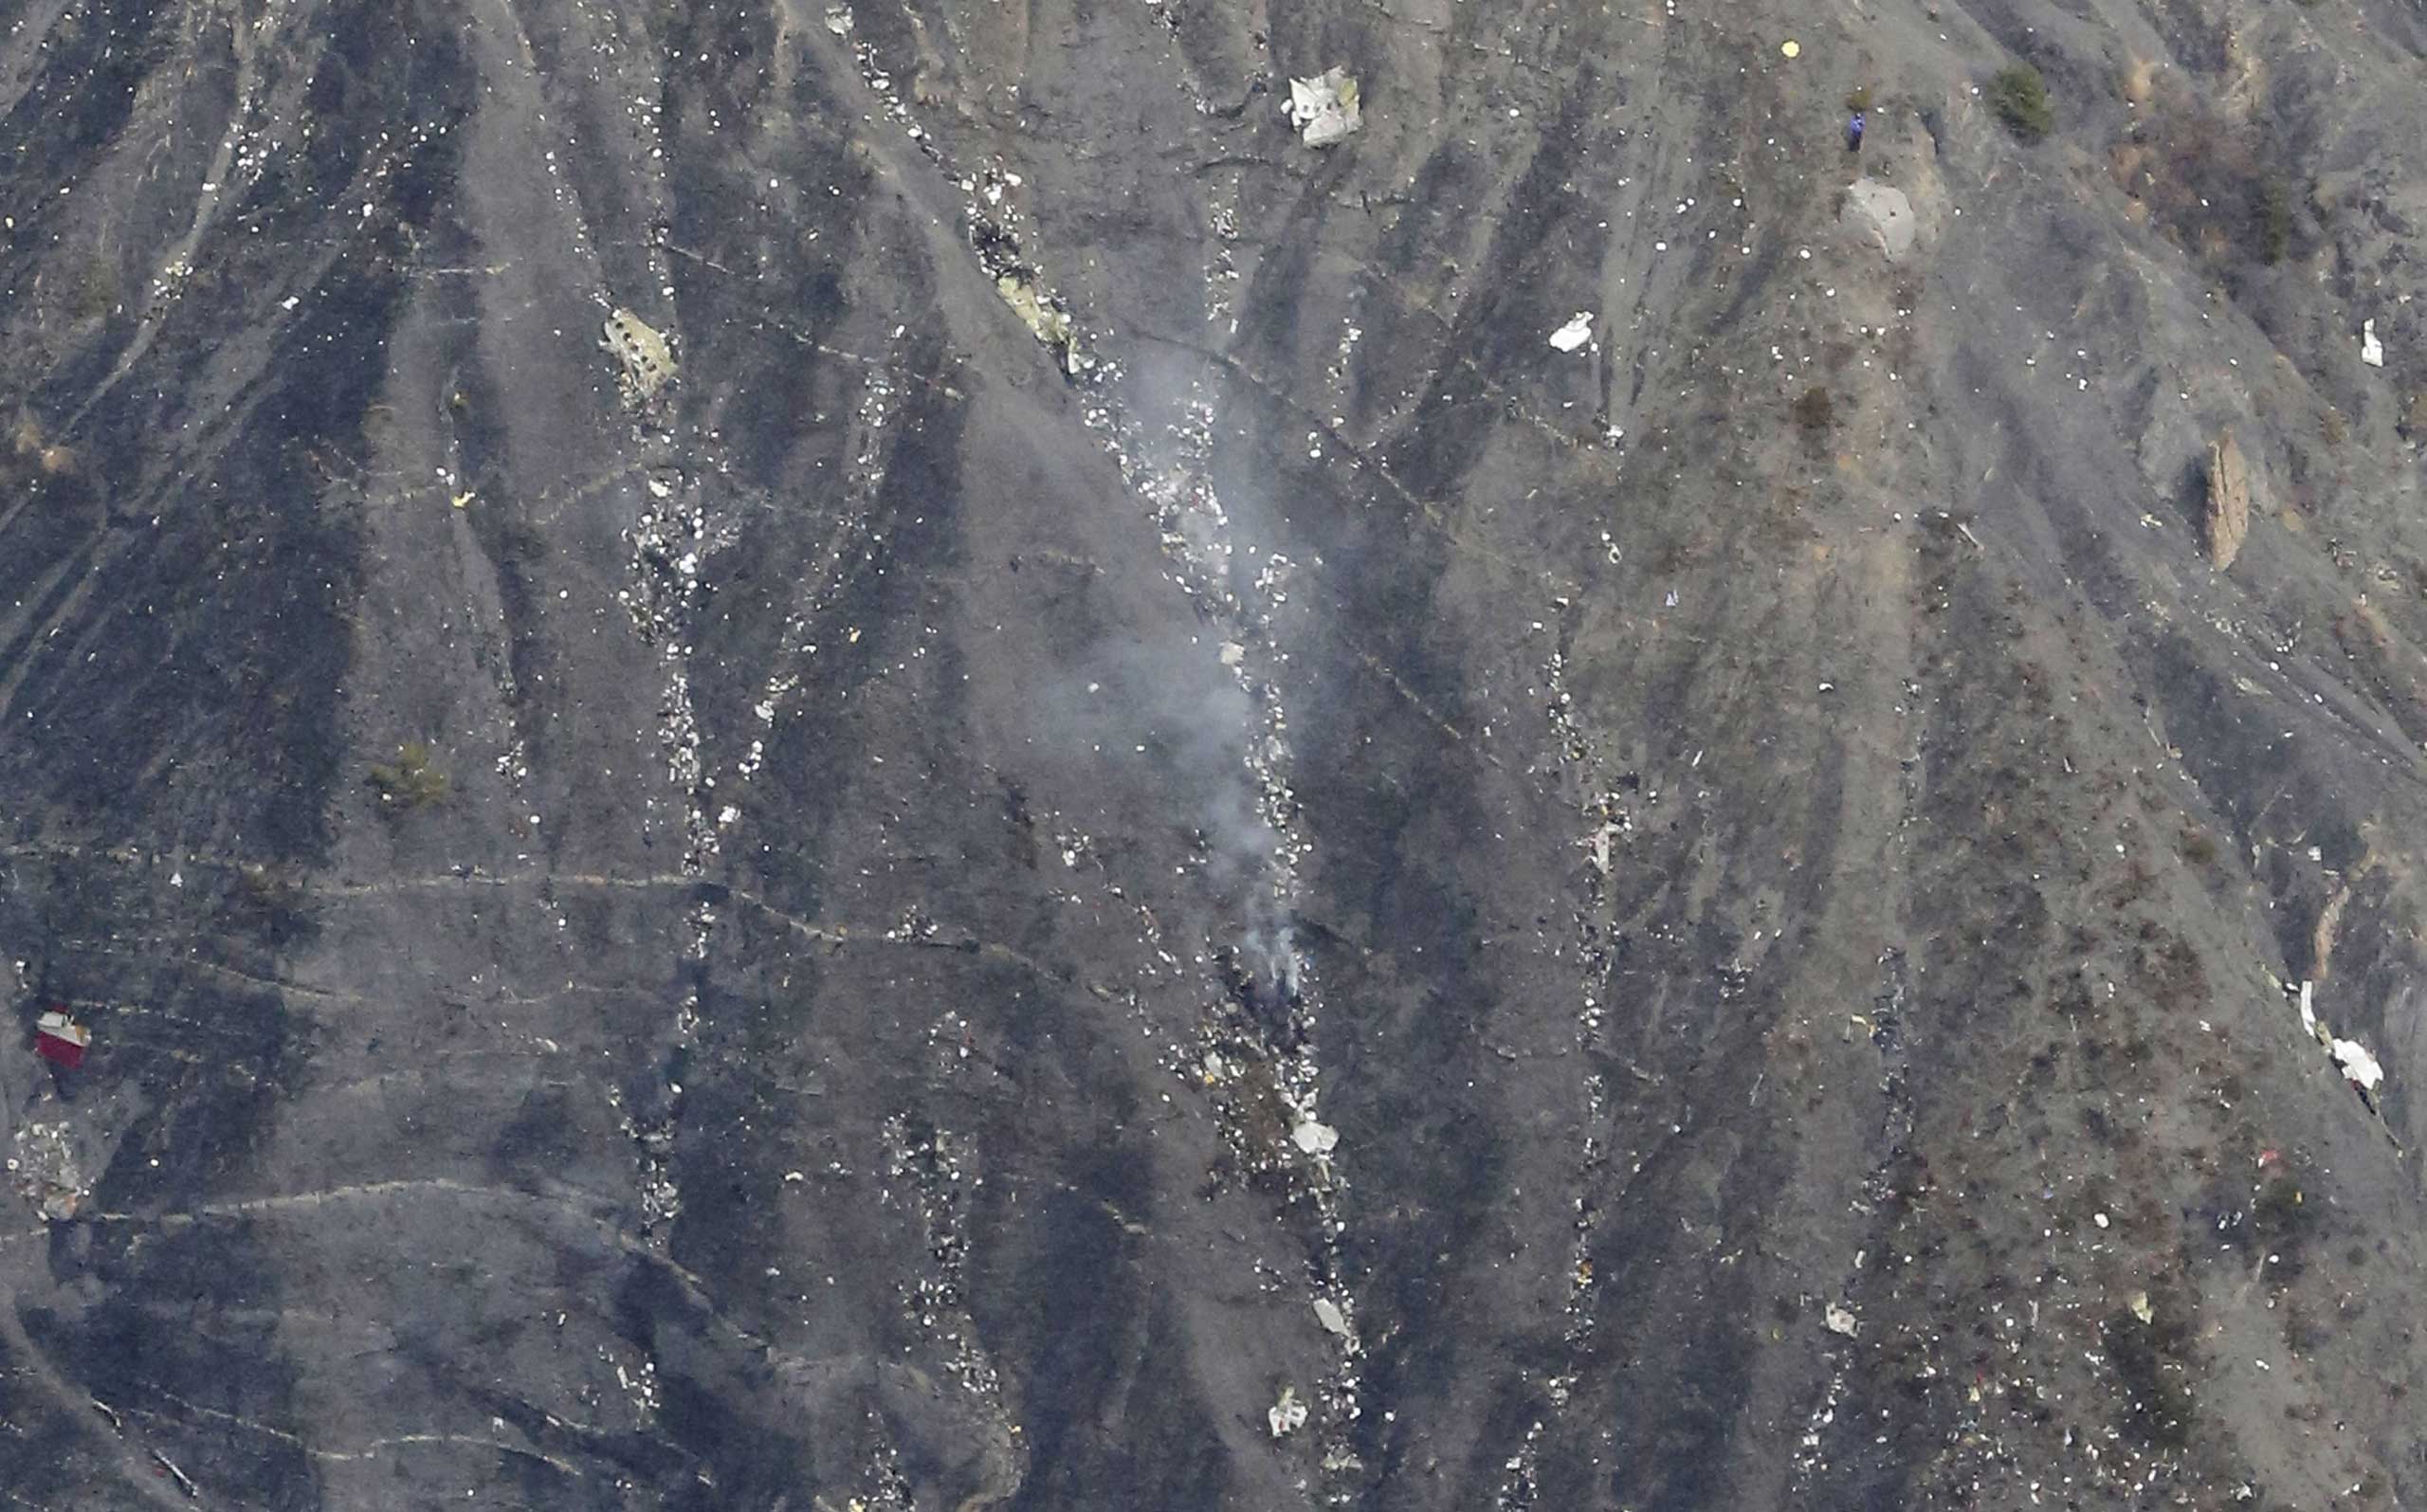 An aerial photo shows what appears to be wreckage from the crash of a Germanwings plane in the French Alps, between Barcelona and Digne, March 24, 2015.